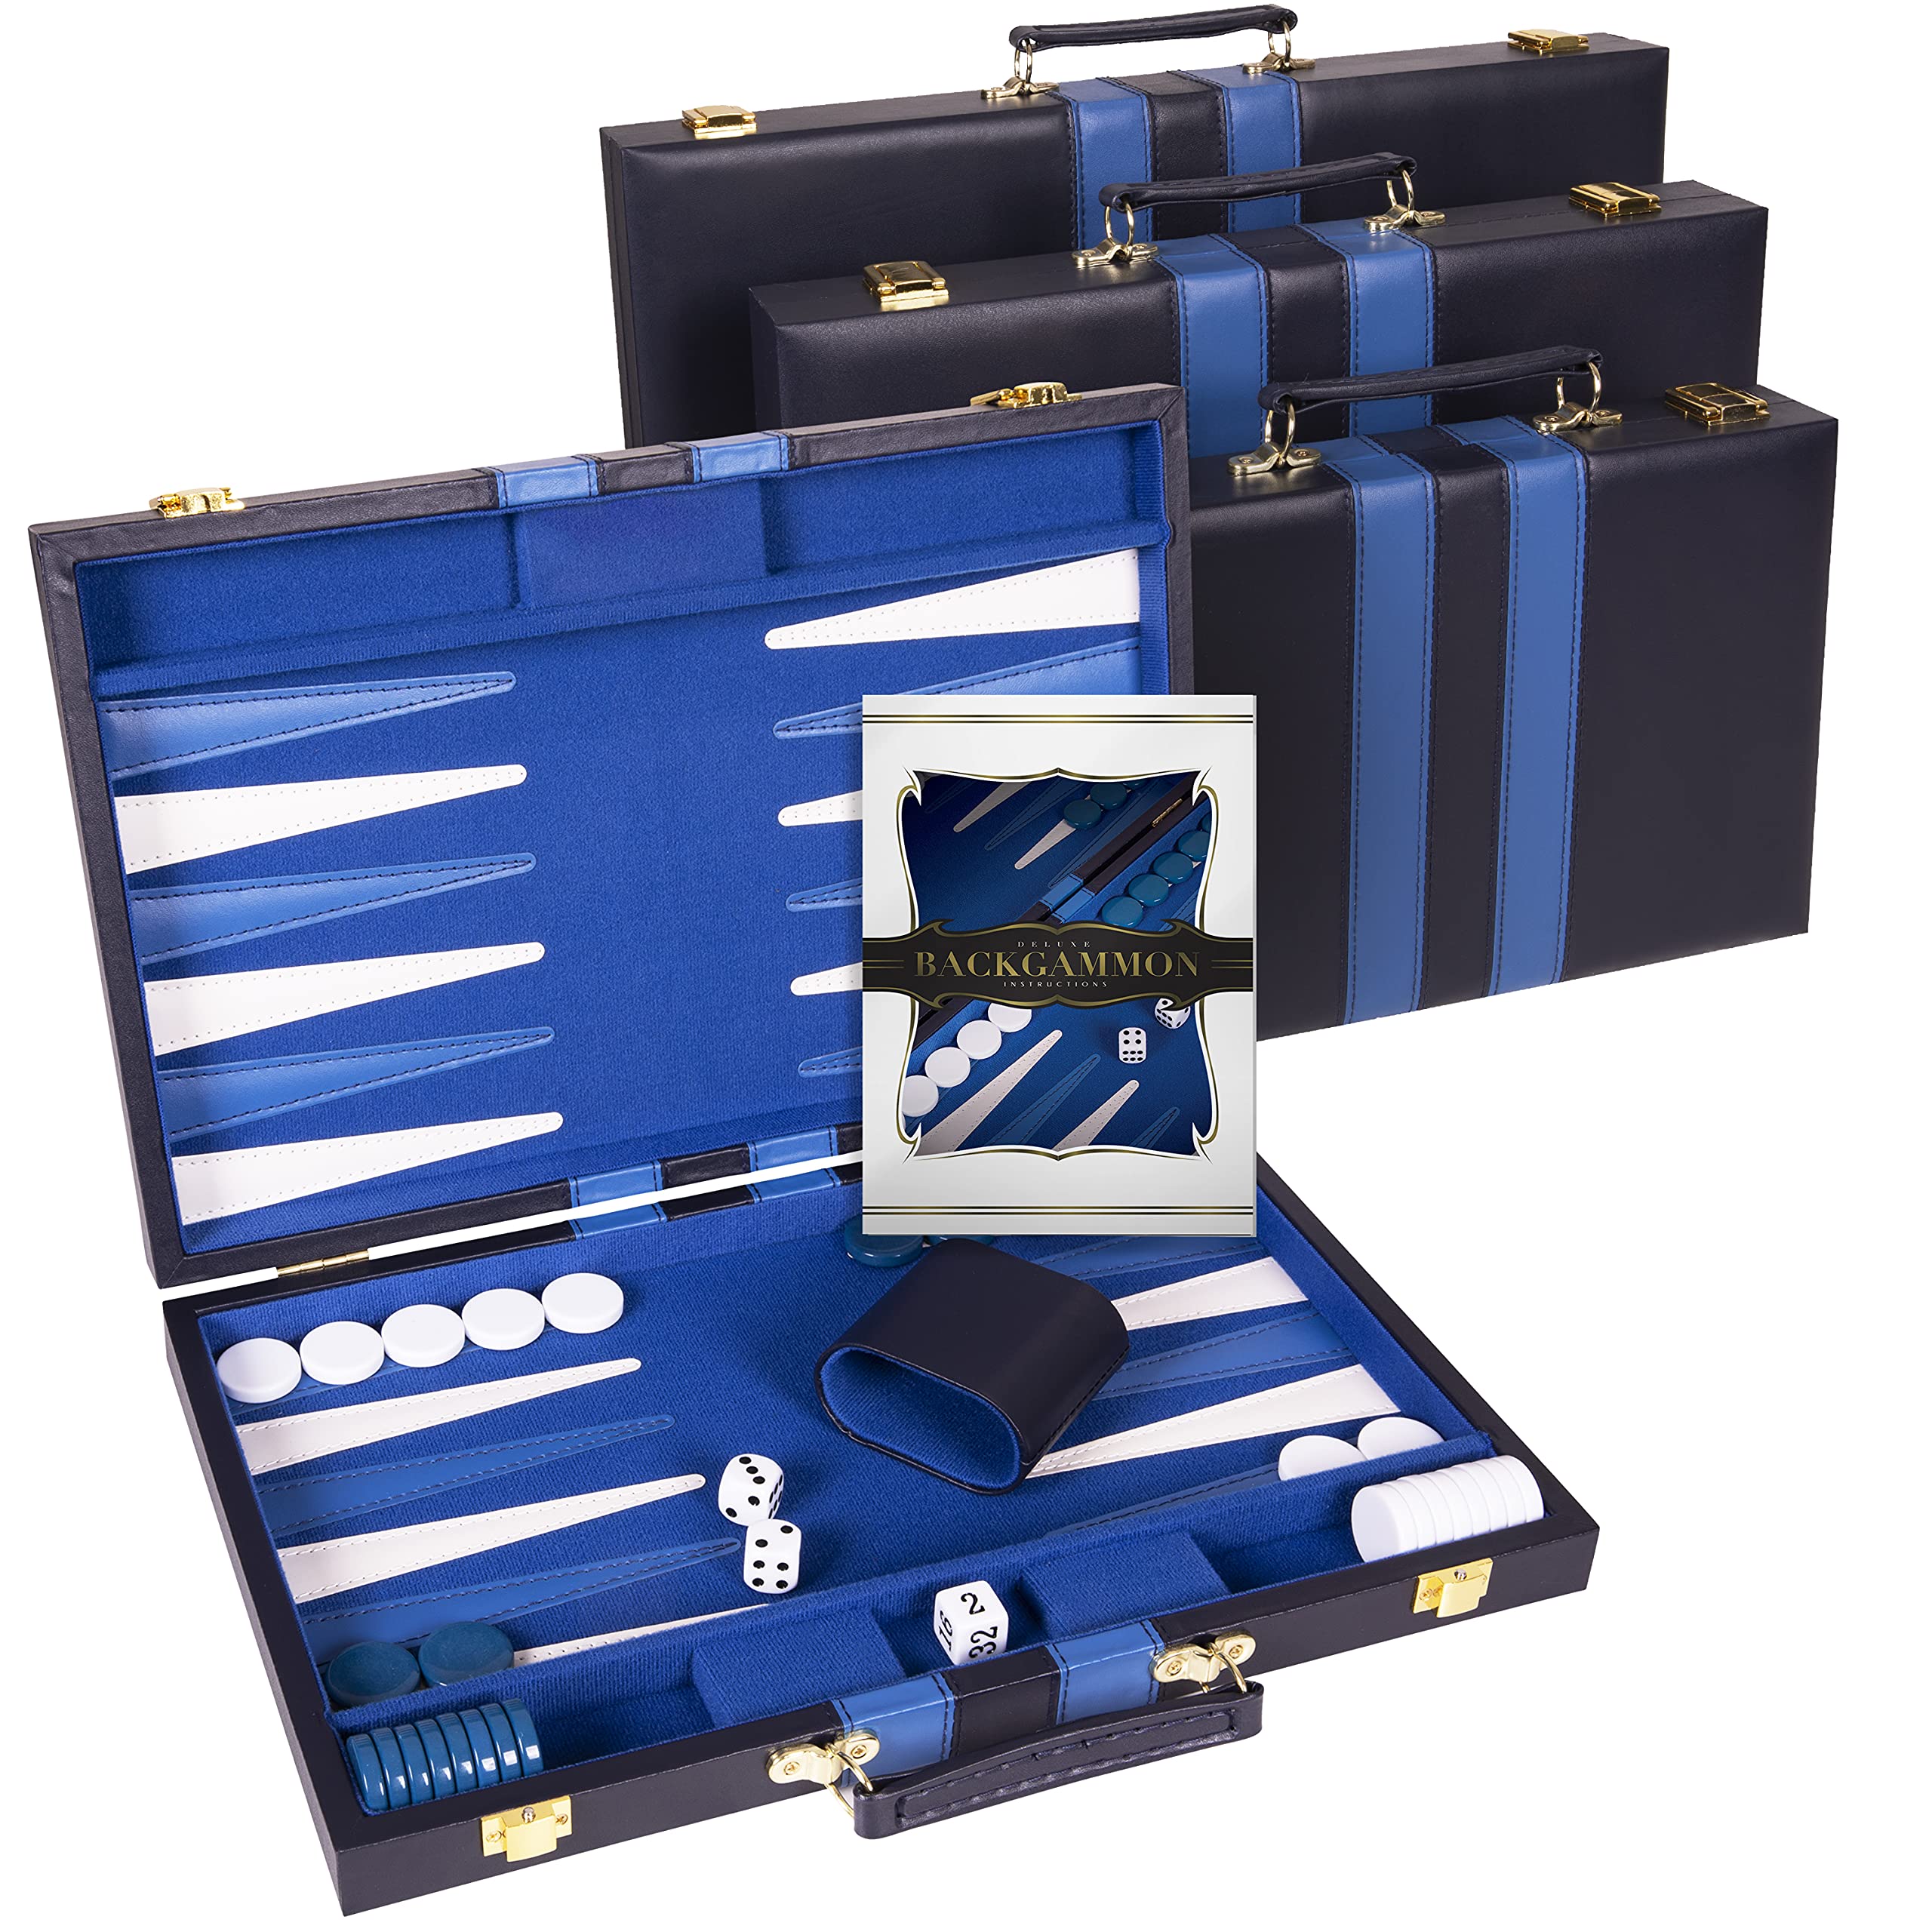 Crazy Games Backgammon Set - Classic Small Blue 11 Inch Backgammon Sets for Adults Board Game with Premium Leather Case - Best Strategy & Tip Guide (Blue, Small)